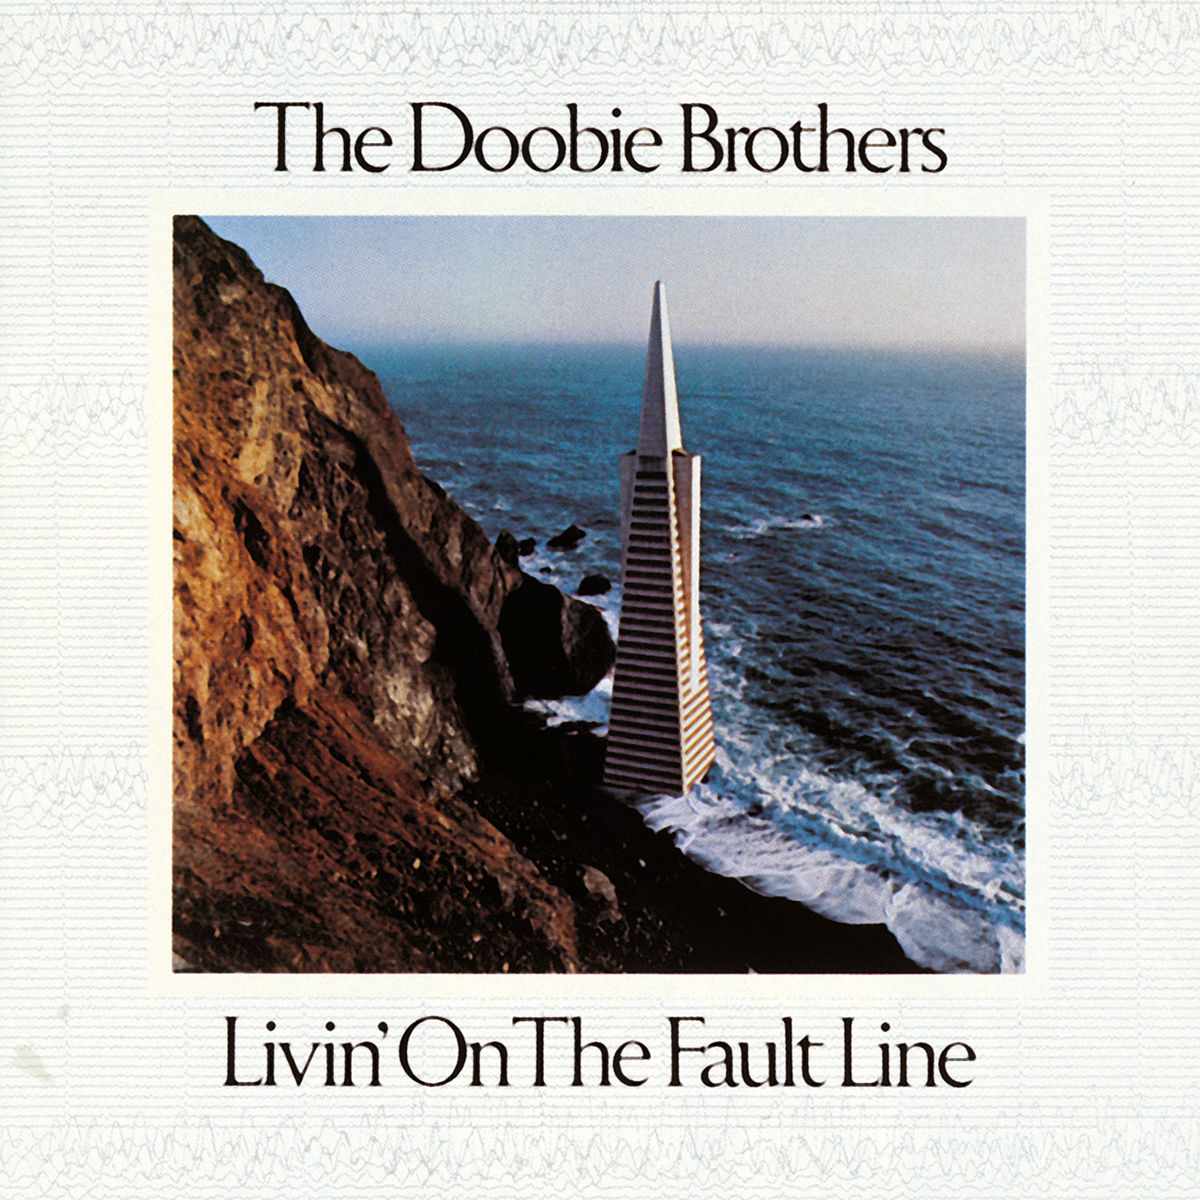 The Doobie Brothers – Livin’ On The Fault Line (1977) (2016 Remastered) [HDTracks FLAC 24bit/192kHz]